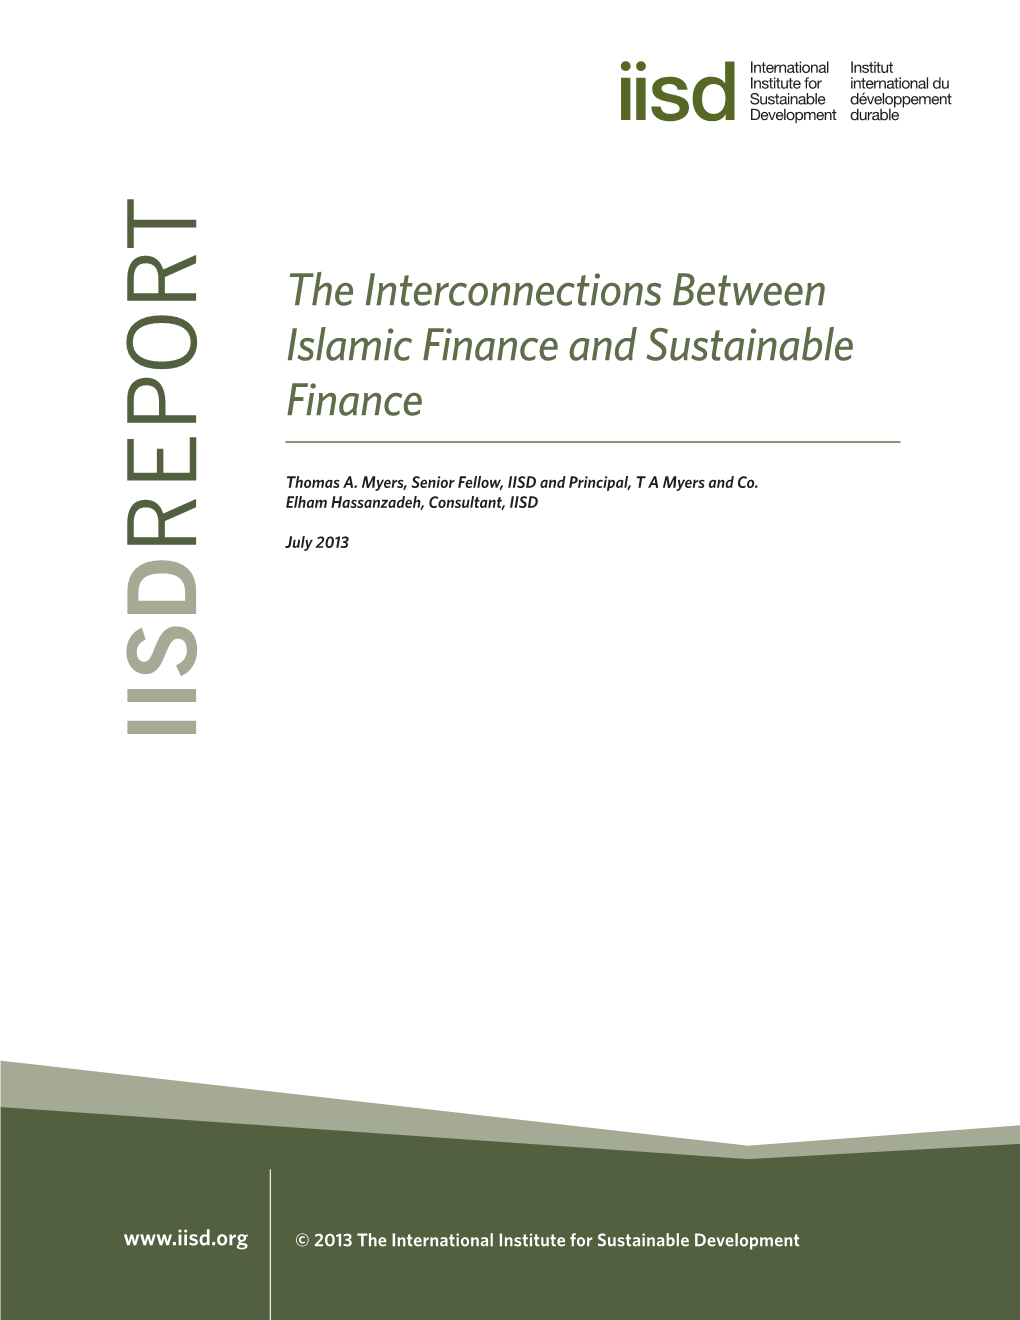 Interconnections Between Islamic Finance and Sustainable Finance